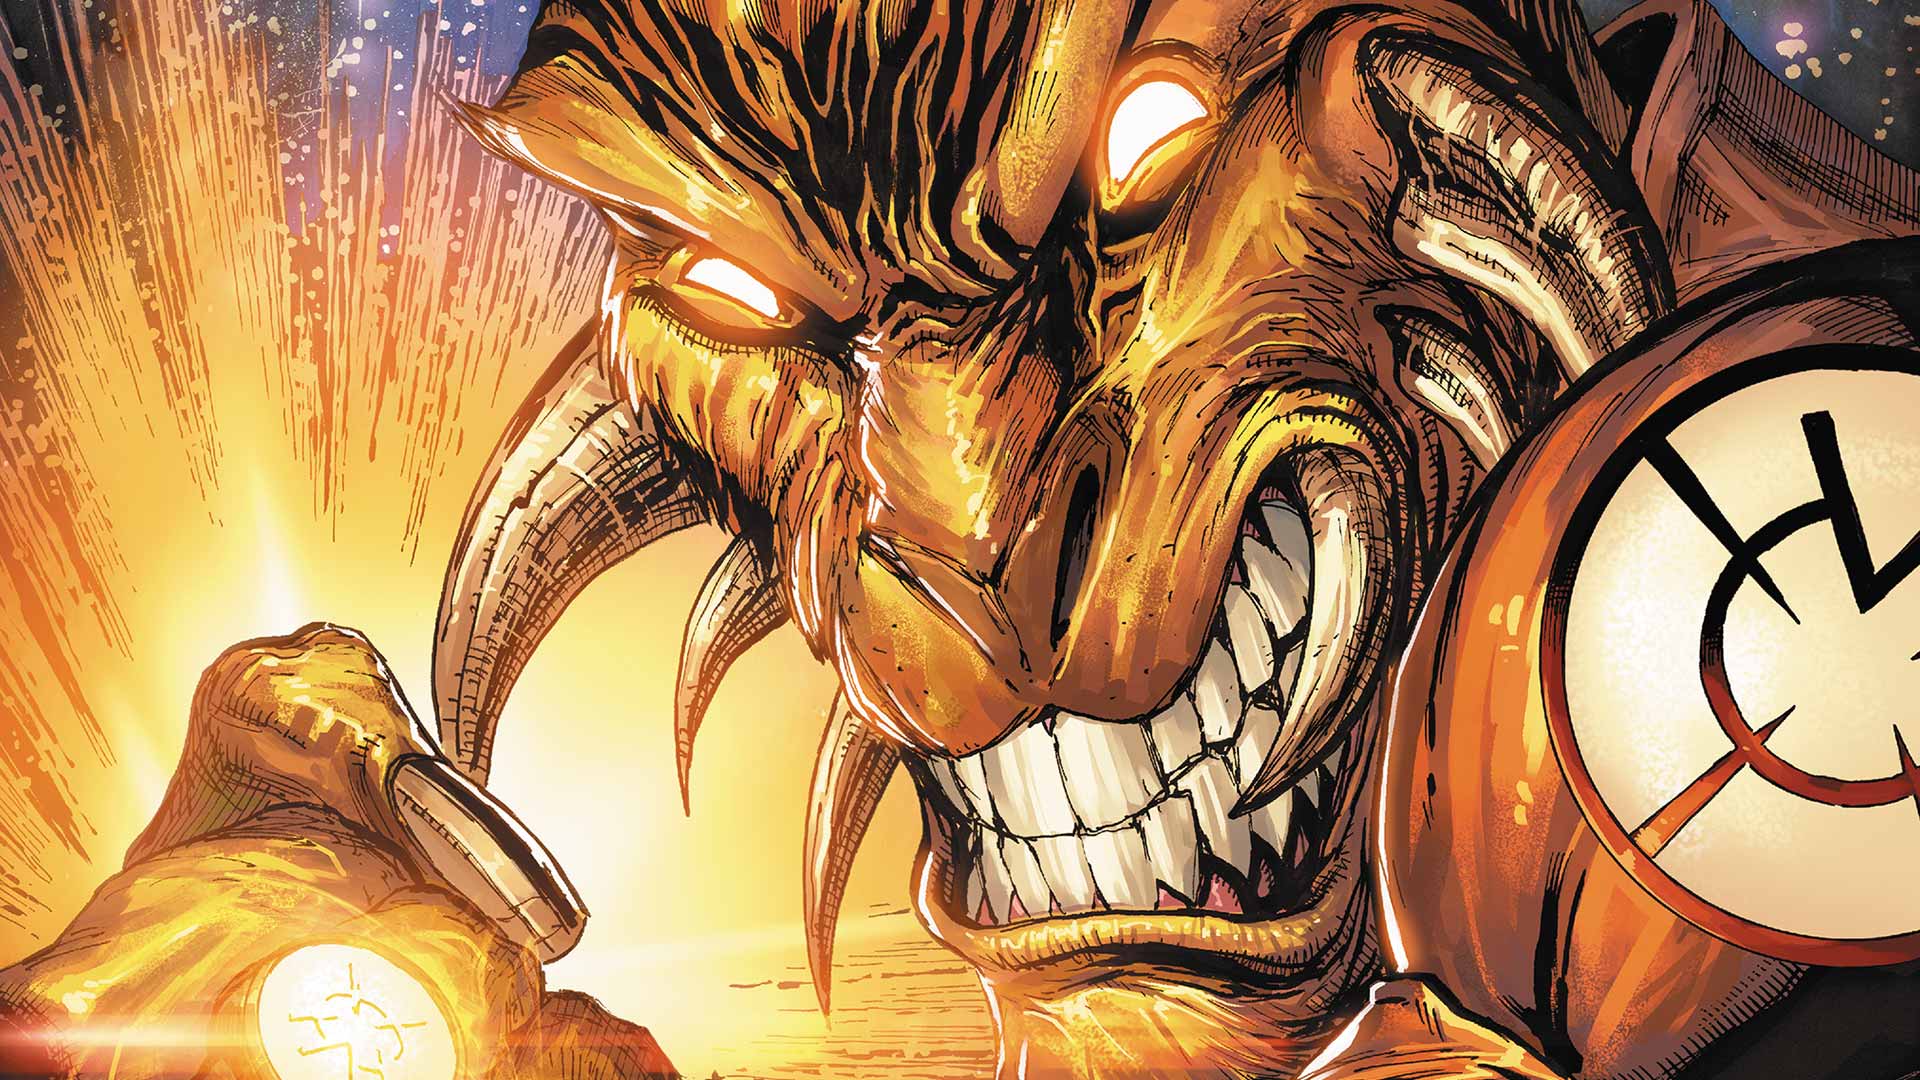 LARFLEEZE VOL. 2: THE FACE OF GREED